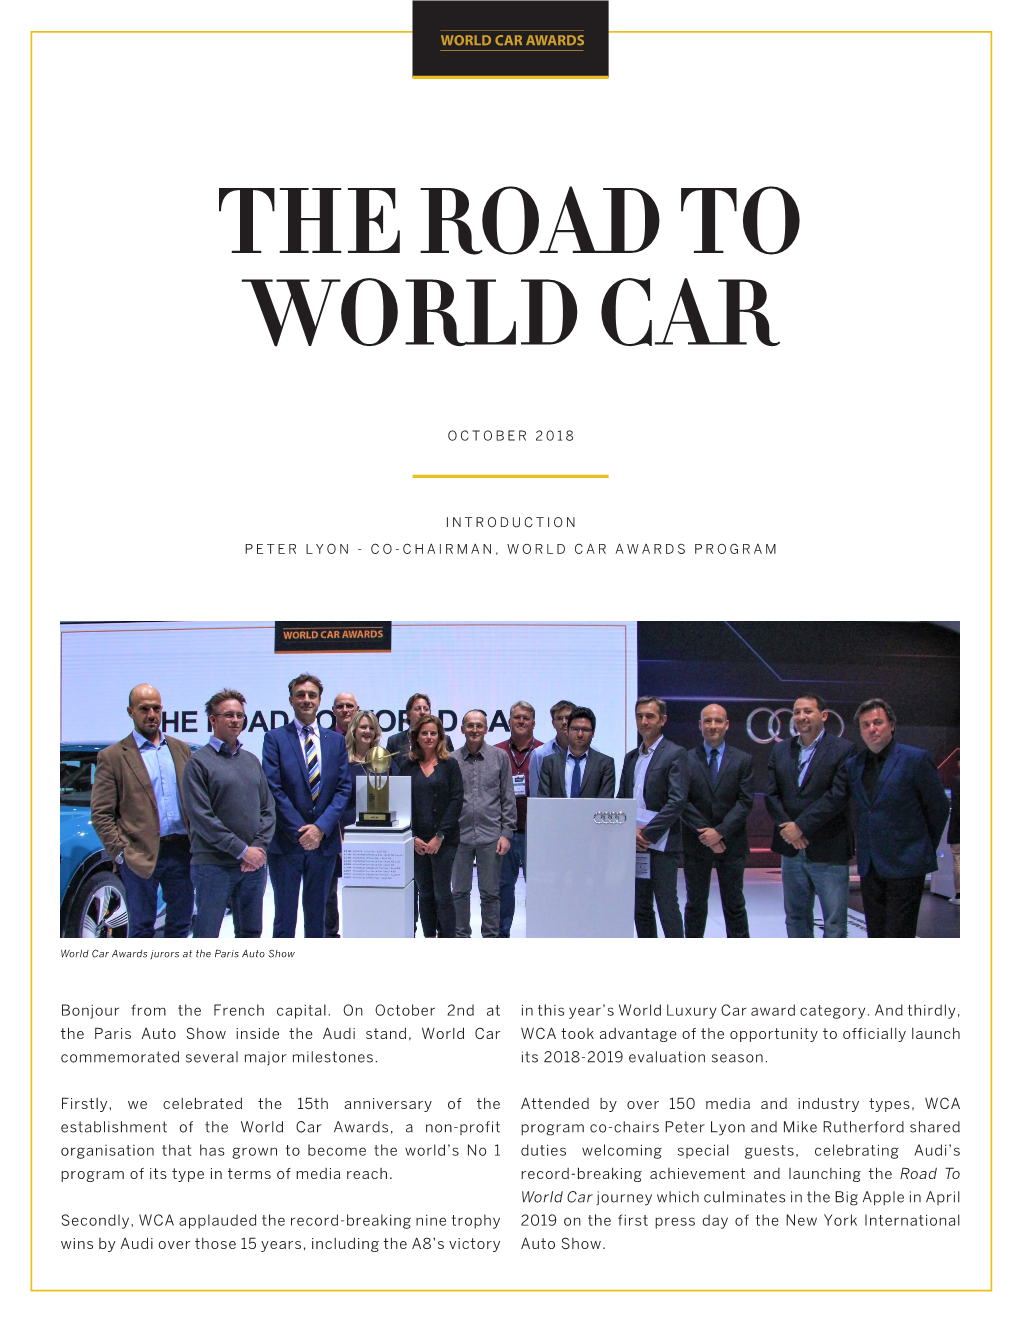 The Road to World Car